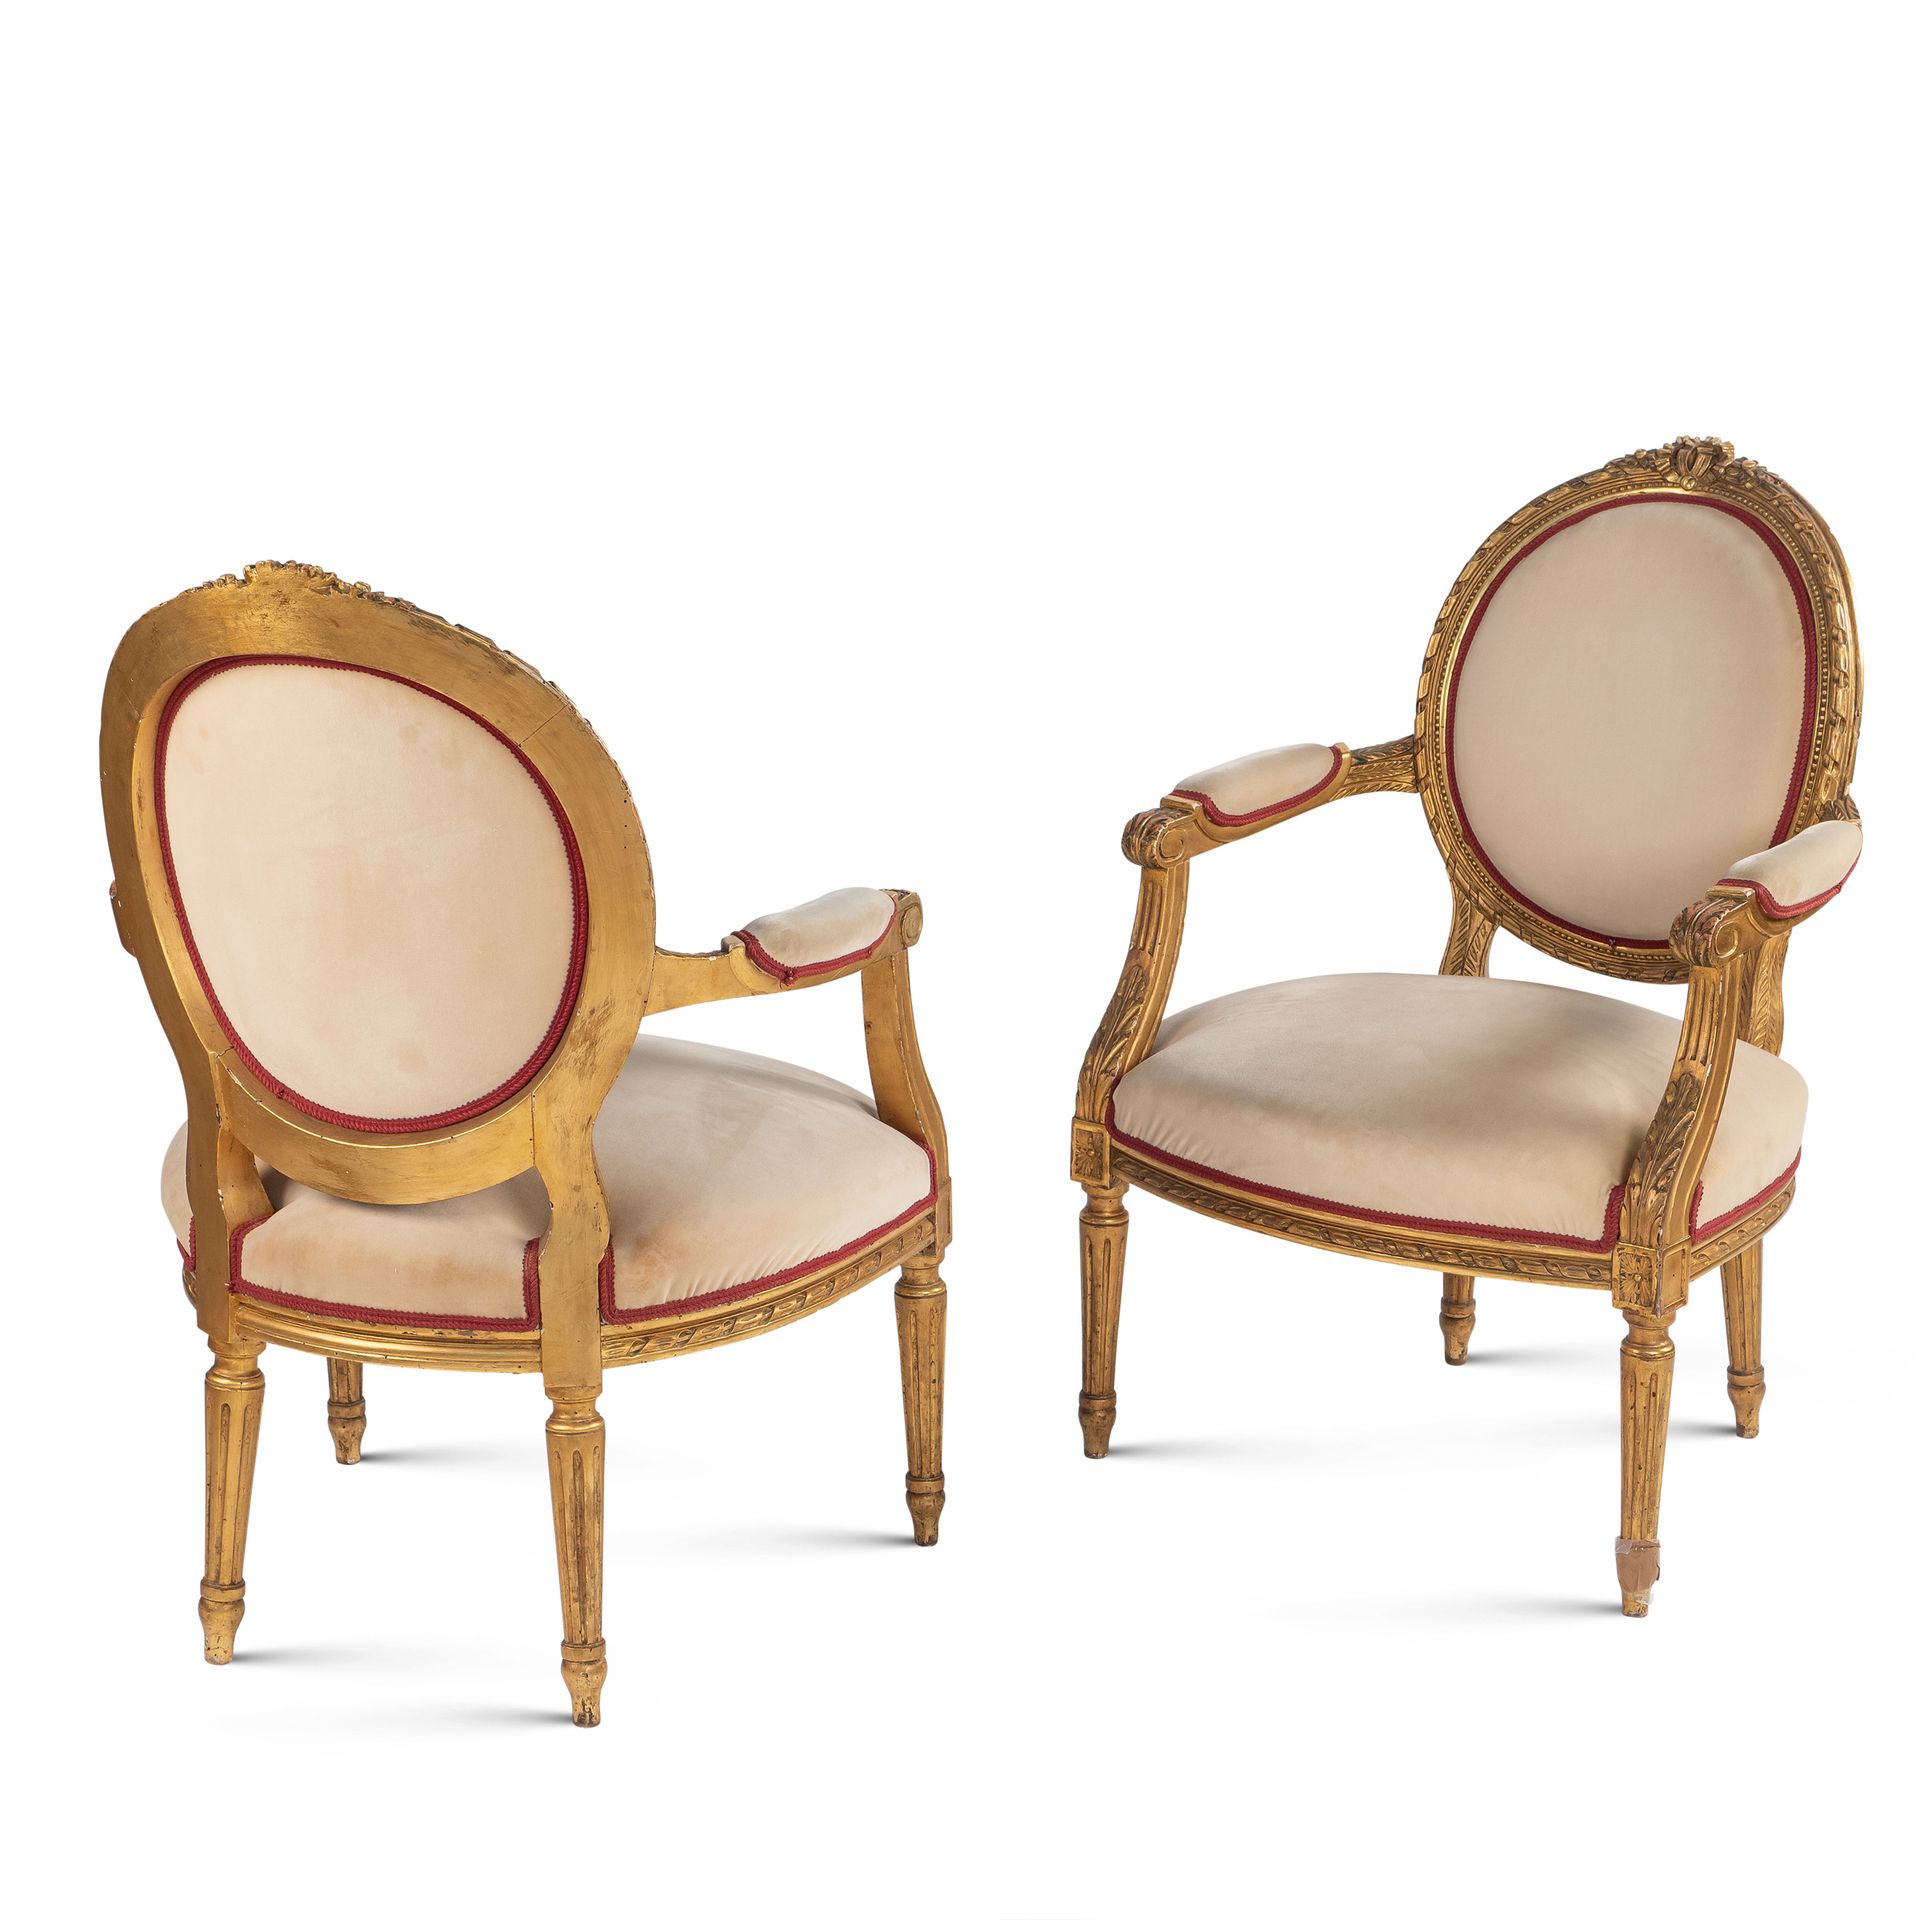 Pair of gilt wood armchairs France, 19th-20th century 83x63x56 cm. Seats and bac&hellip;